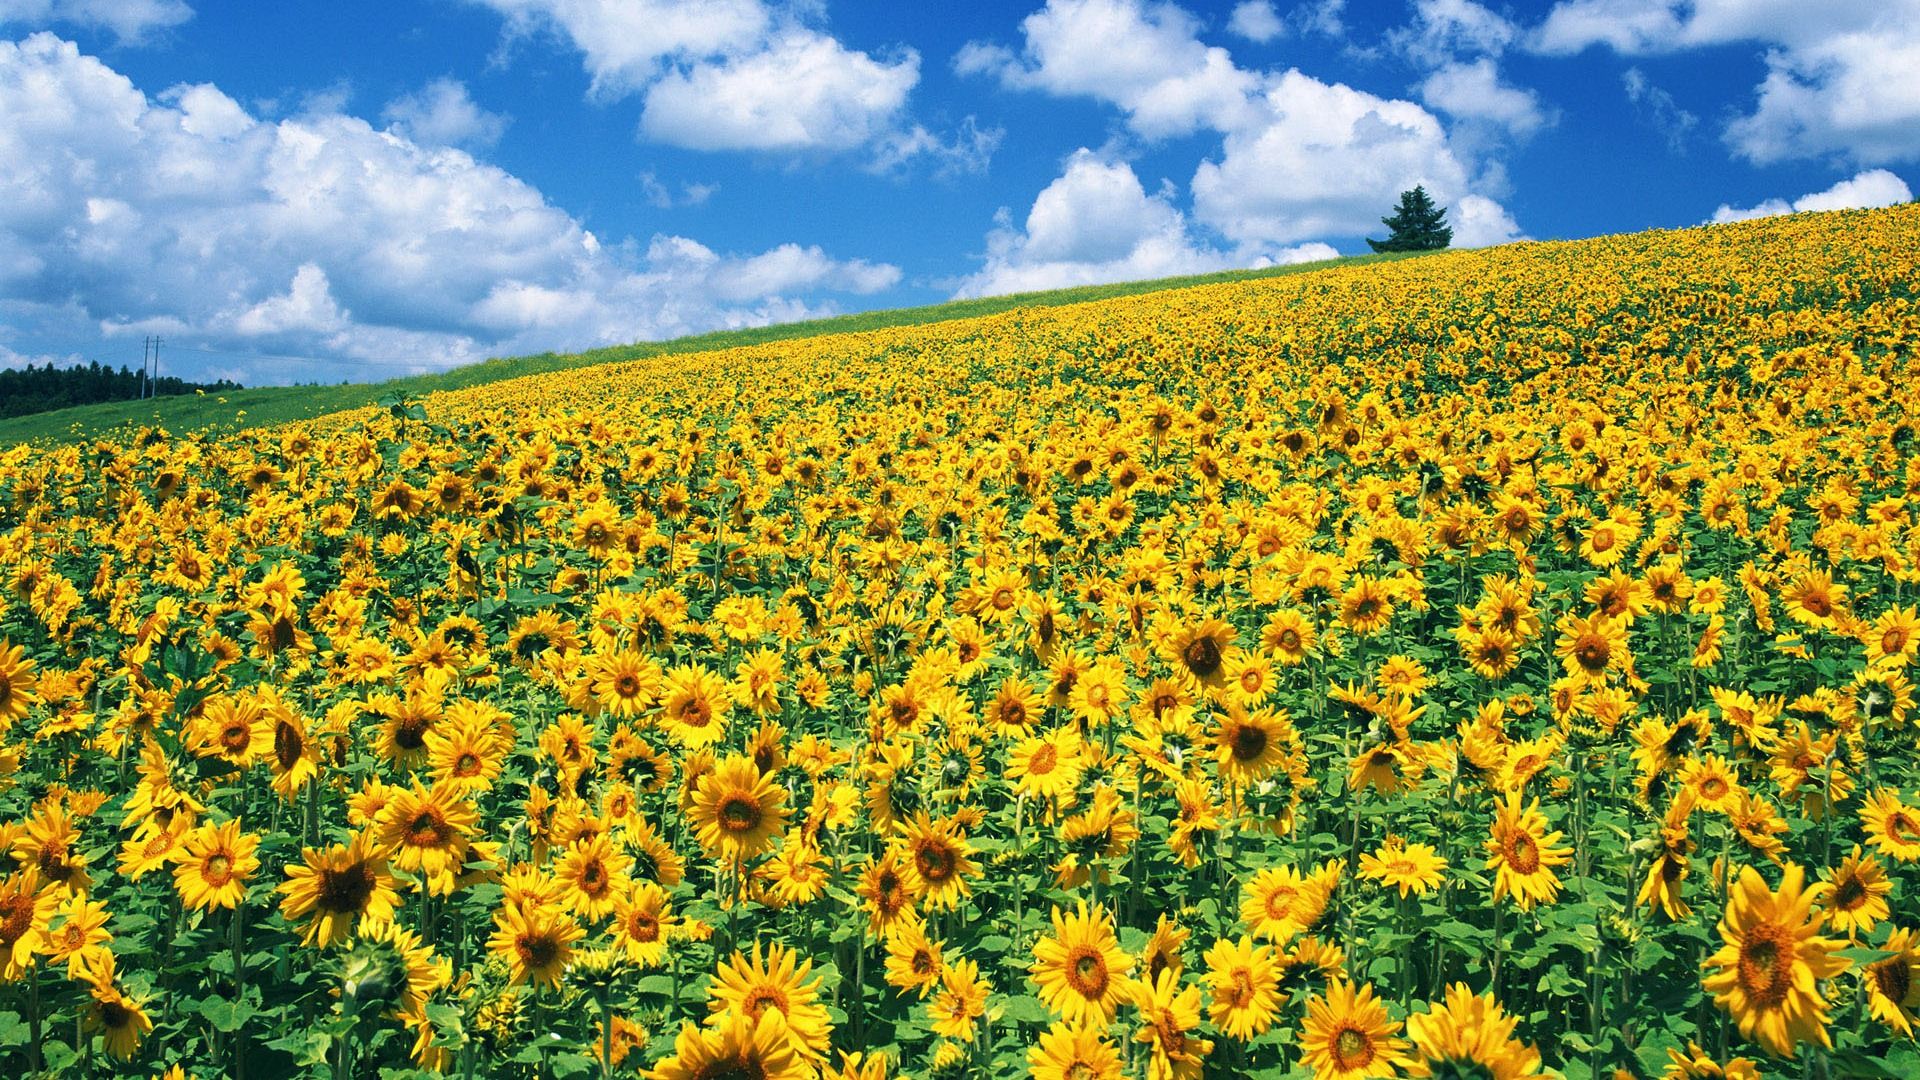 Sunflower Field background picture hd